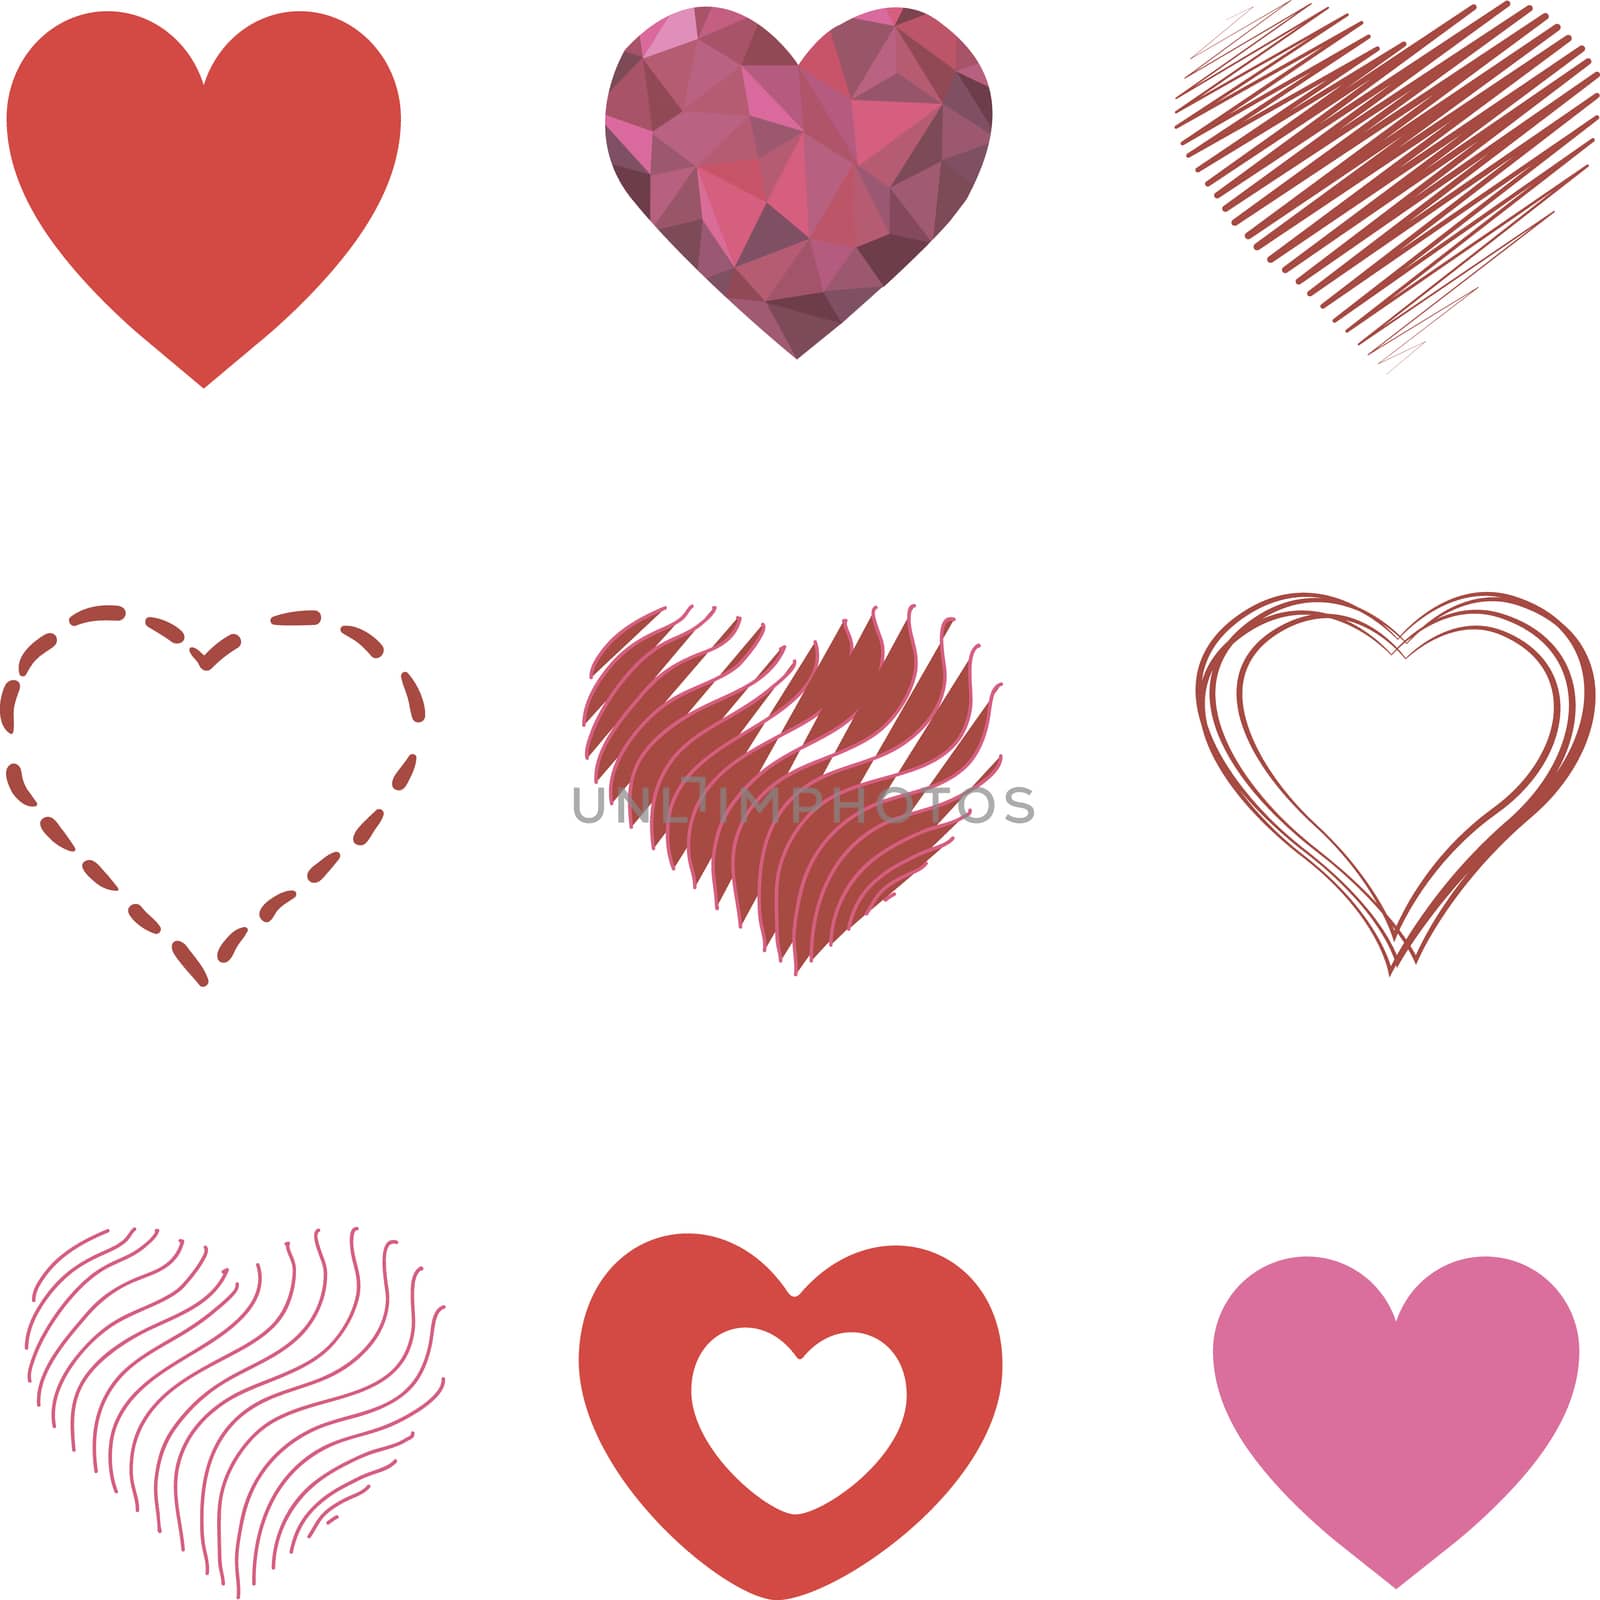 Pattern of 9 red romantic hearts different. Heart and Love Icon Symbol isolated on white background. Valentine's day pattern by Roman1030